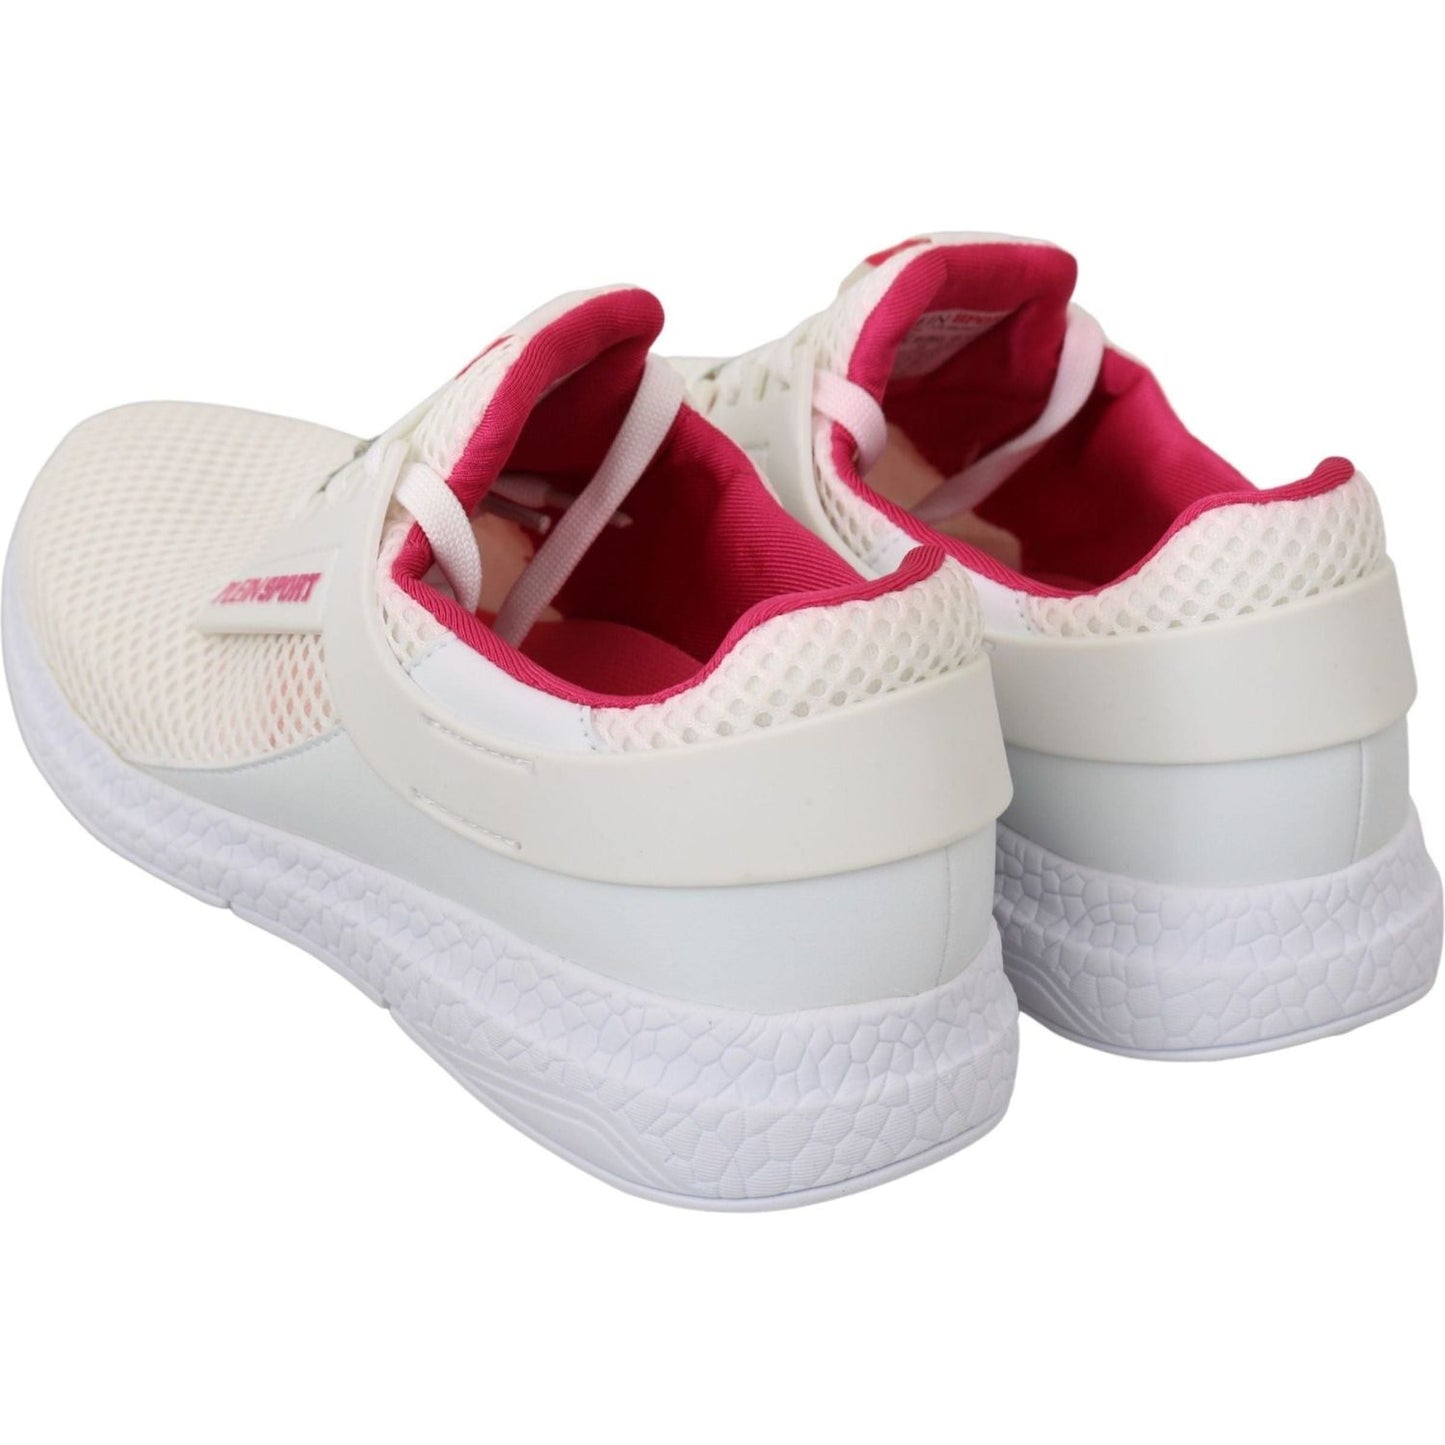 Philipp Plein Chic White Becky Sneakers with Pink Accents WOMAN SNEAKERS white-pink-polyester-becky-sneakers-shoes